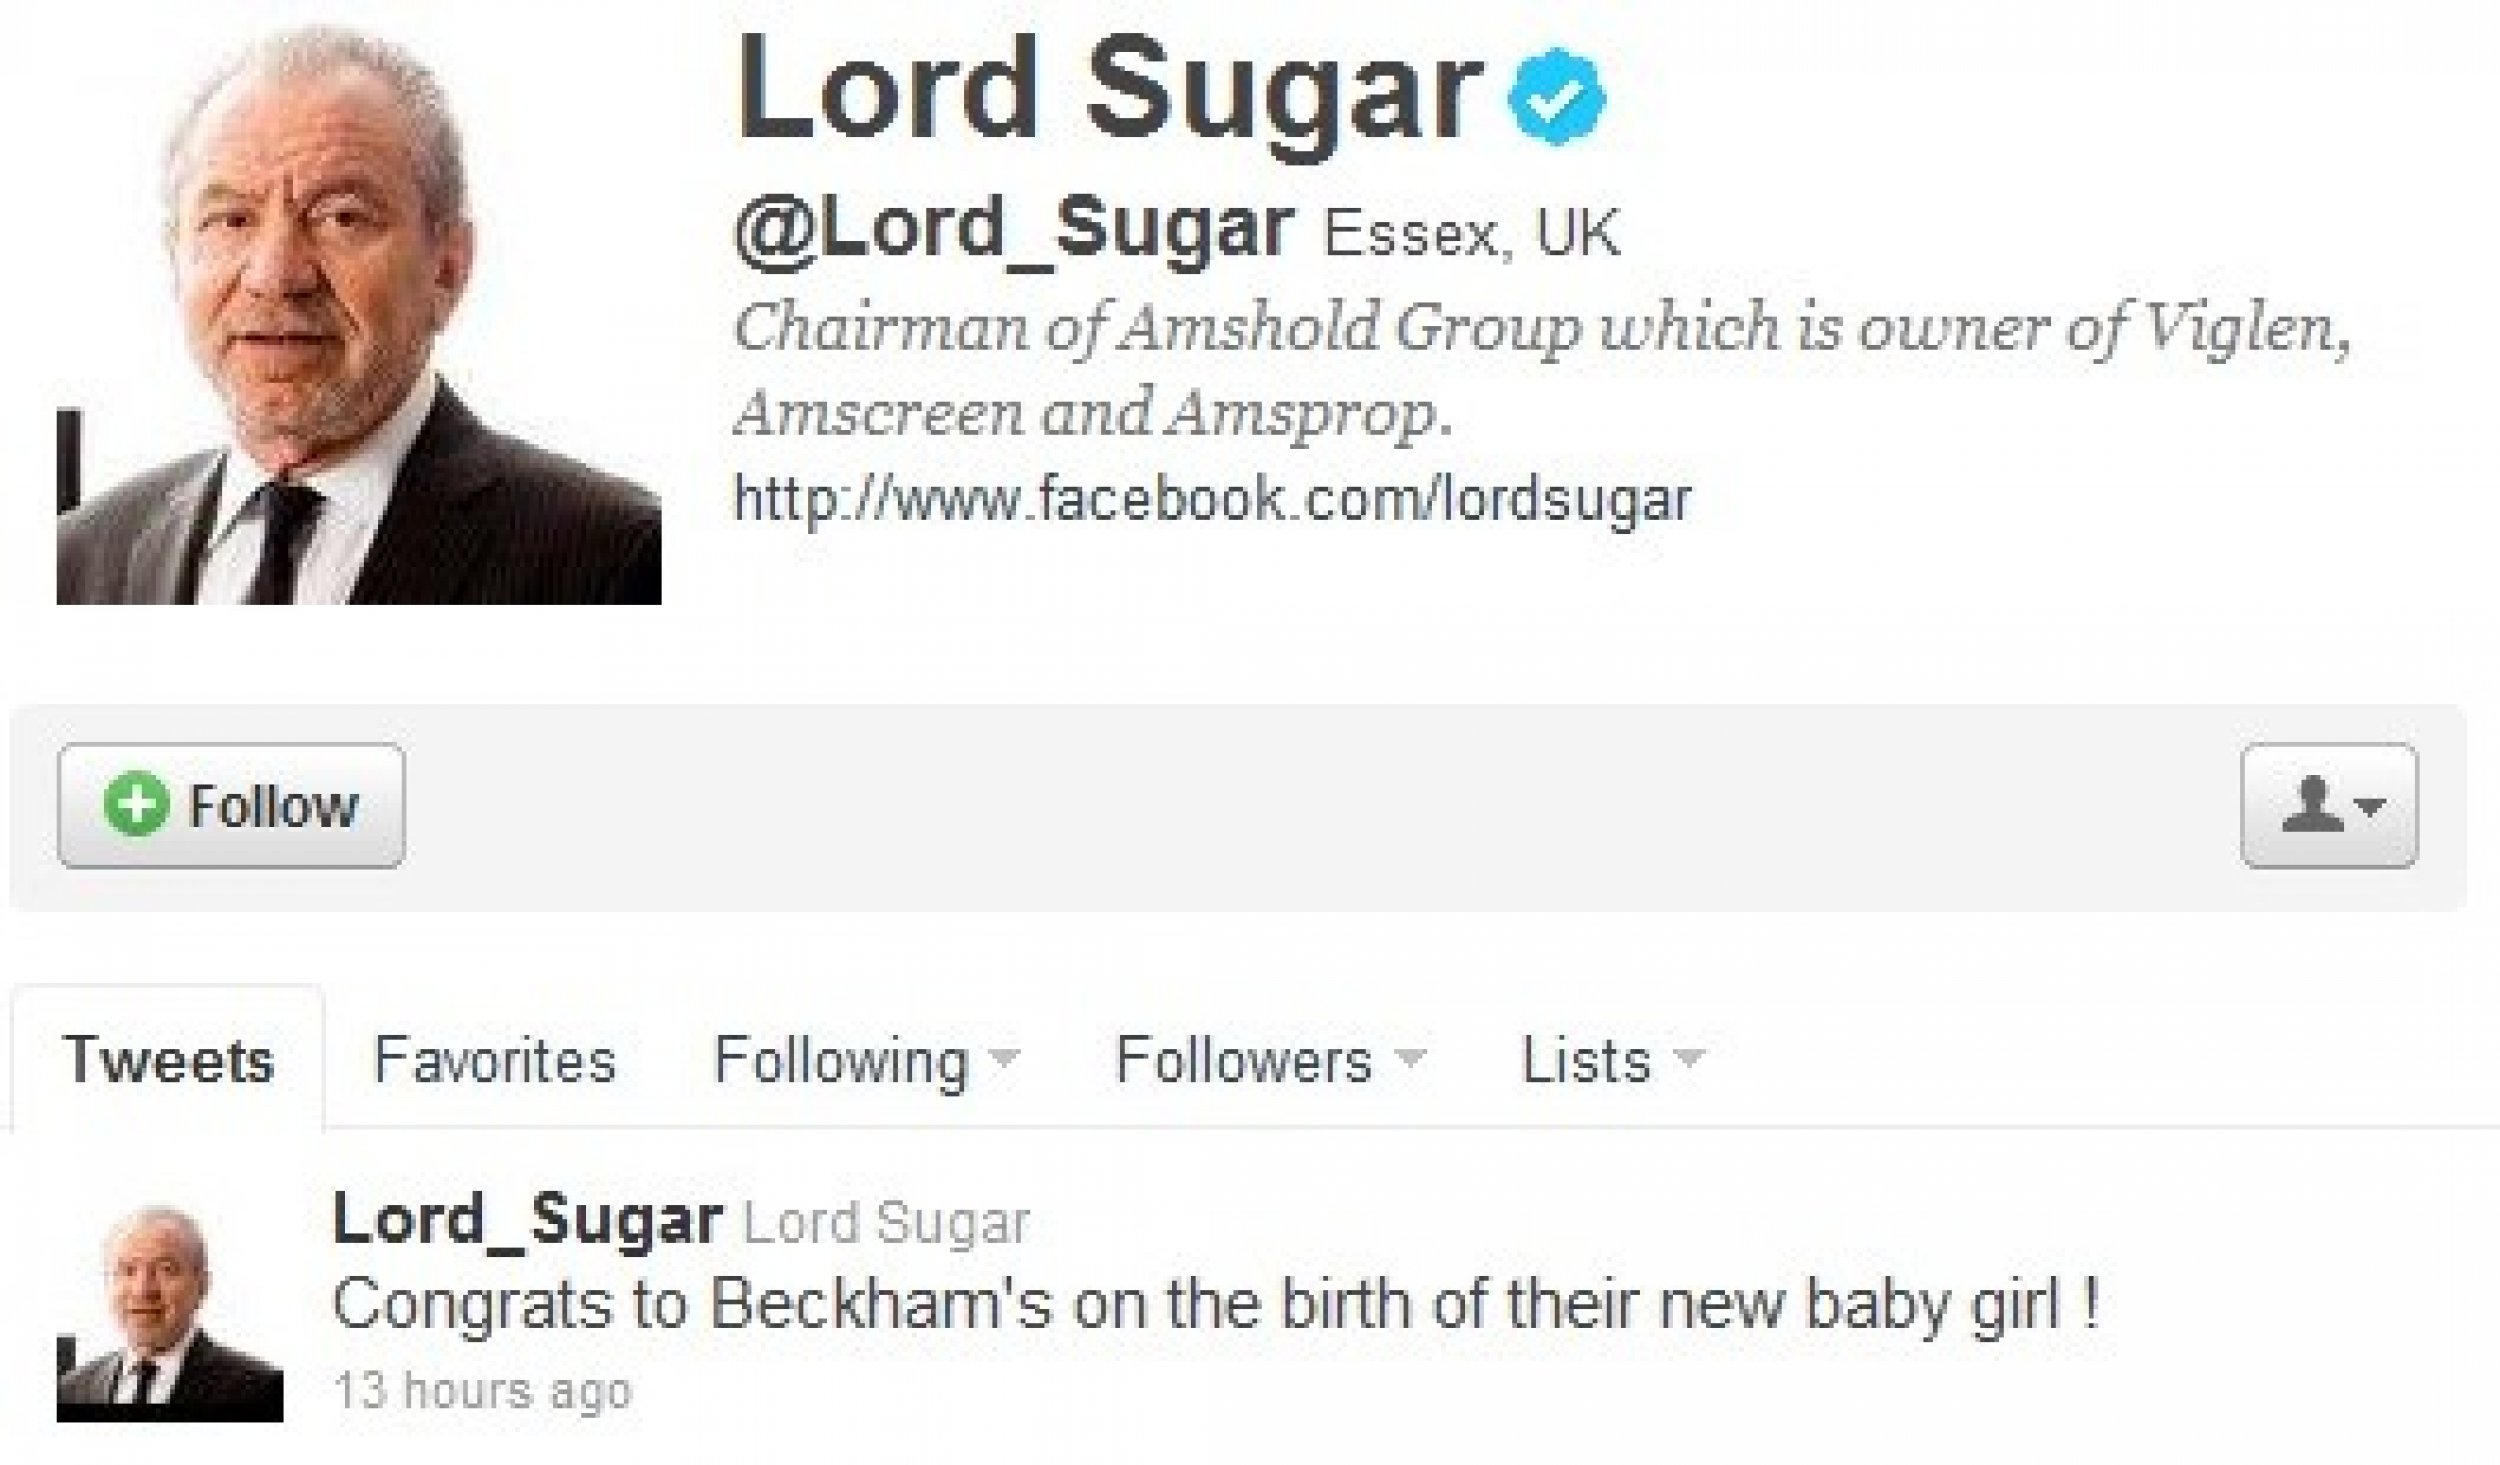 Top celebrity tweets congratulating David and Victoria Beckham for their baby daughter.